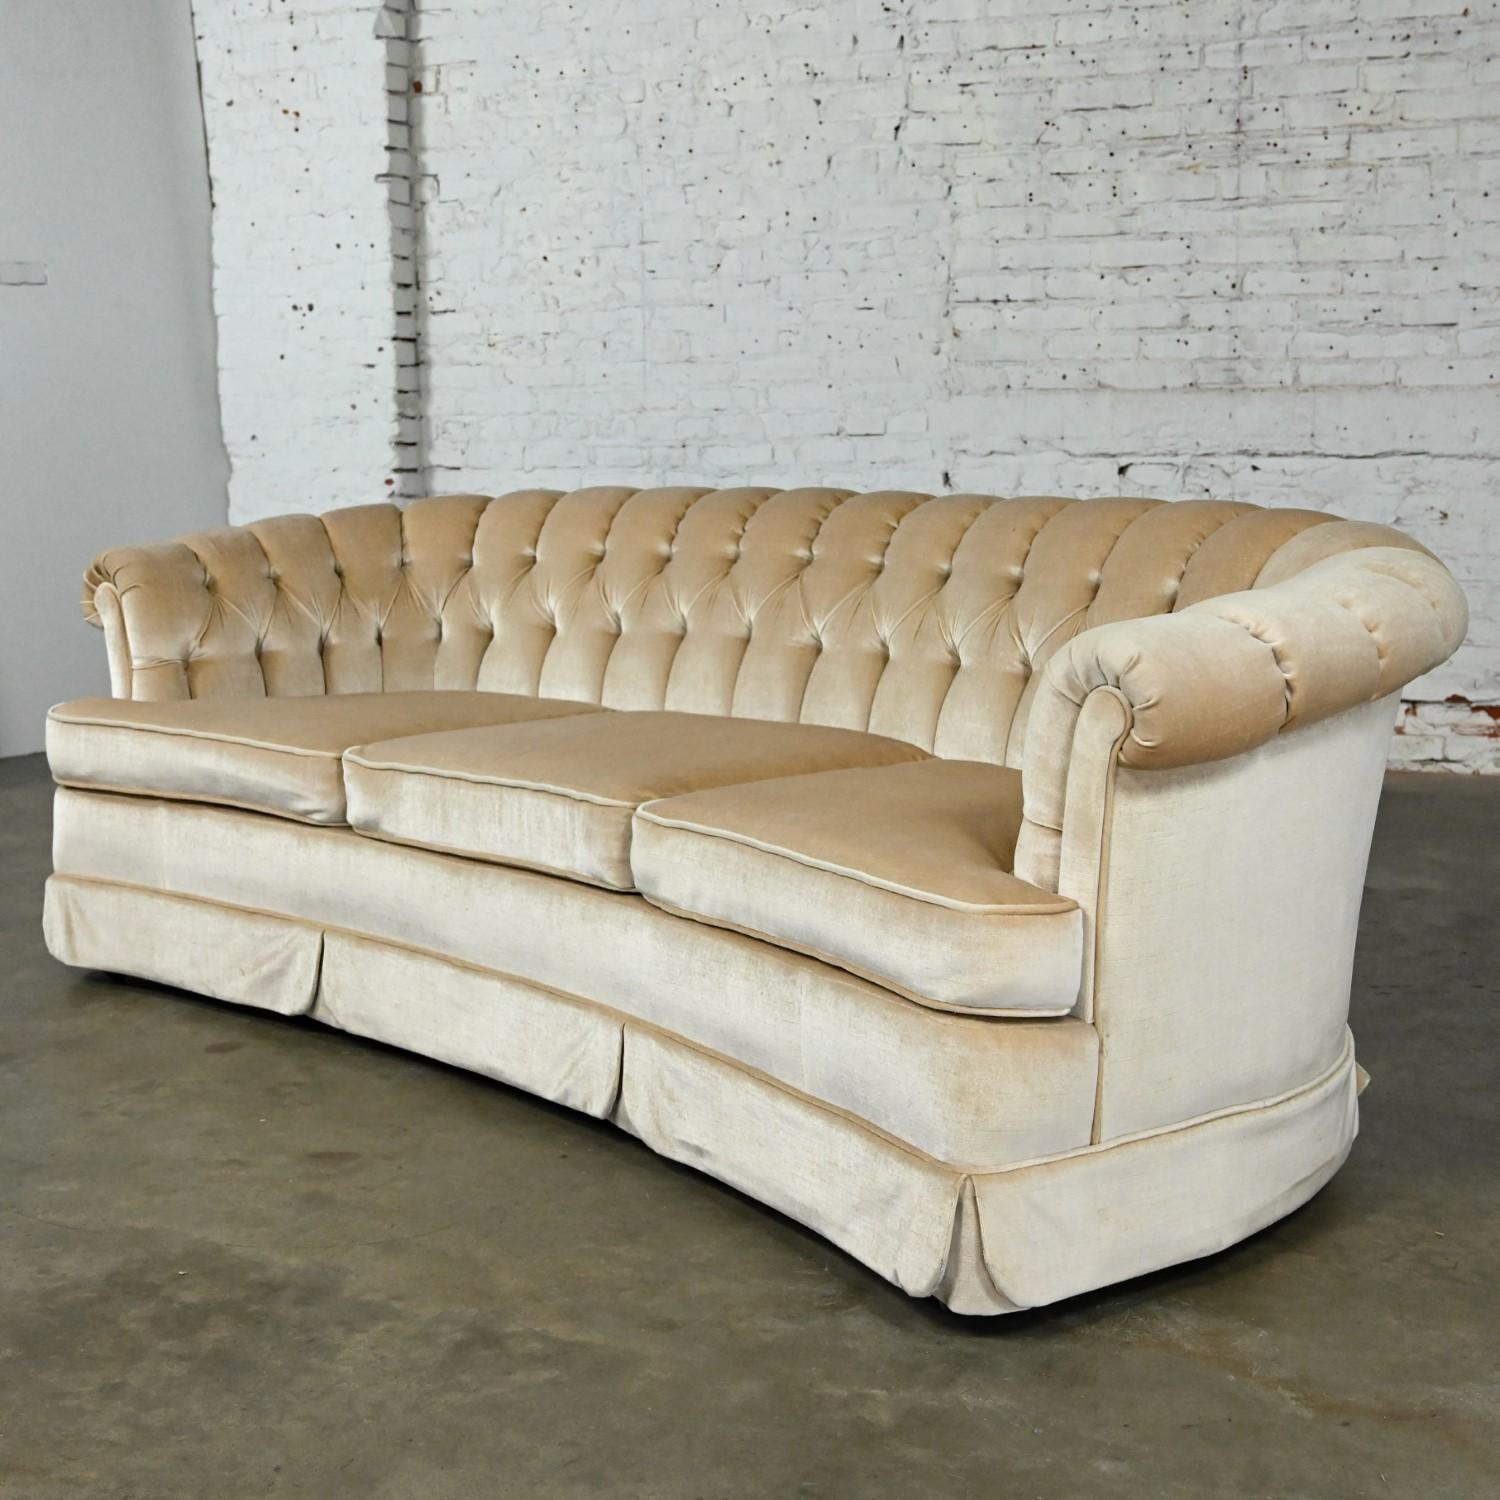 Lovely Mid-20th Century Hollywood Regency curved sofa by Lee Harvey for Maddox with beige or camel colored velvet fabric, rolled arms, button tufted & channeled back, three loose, zippered foam seat cushions, three ball casters in front & three